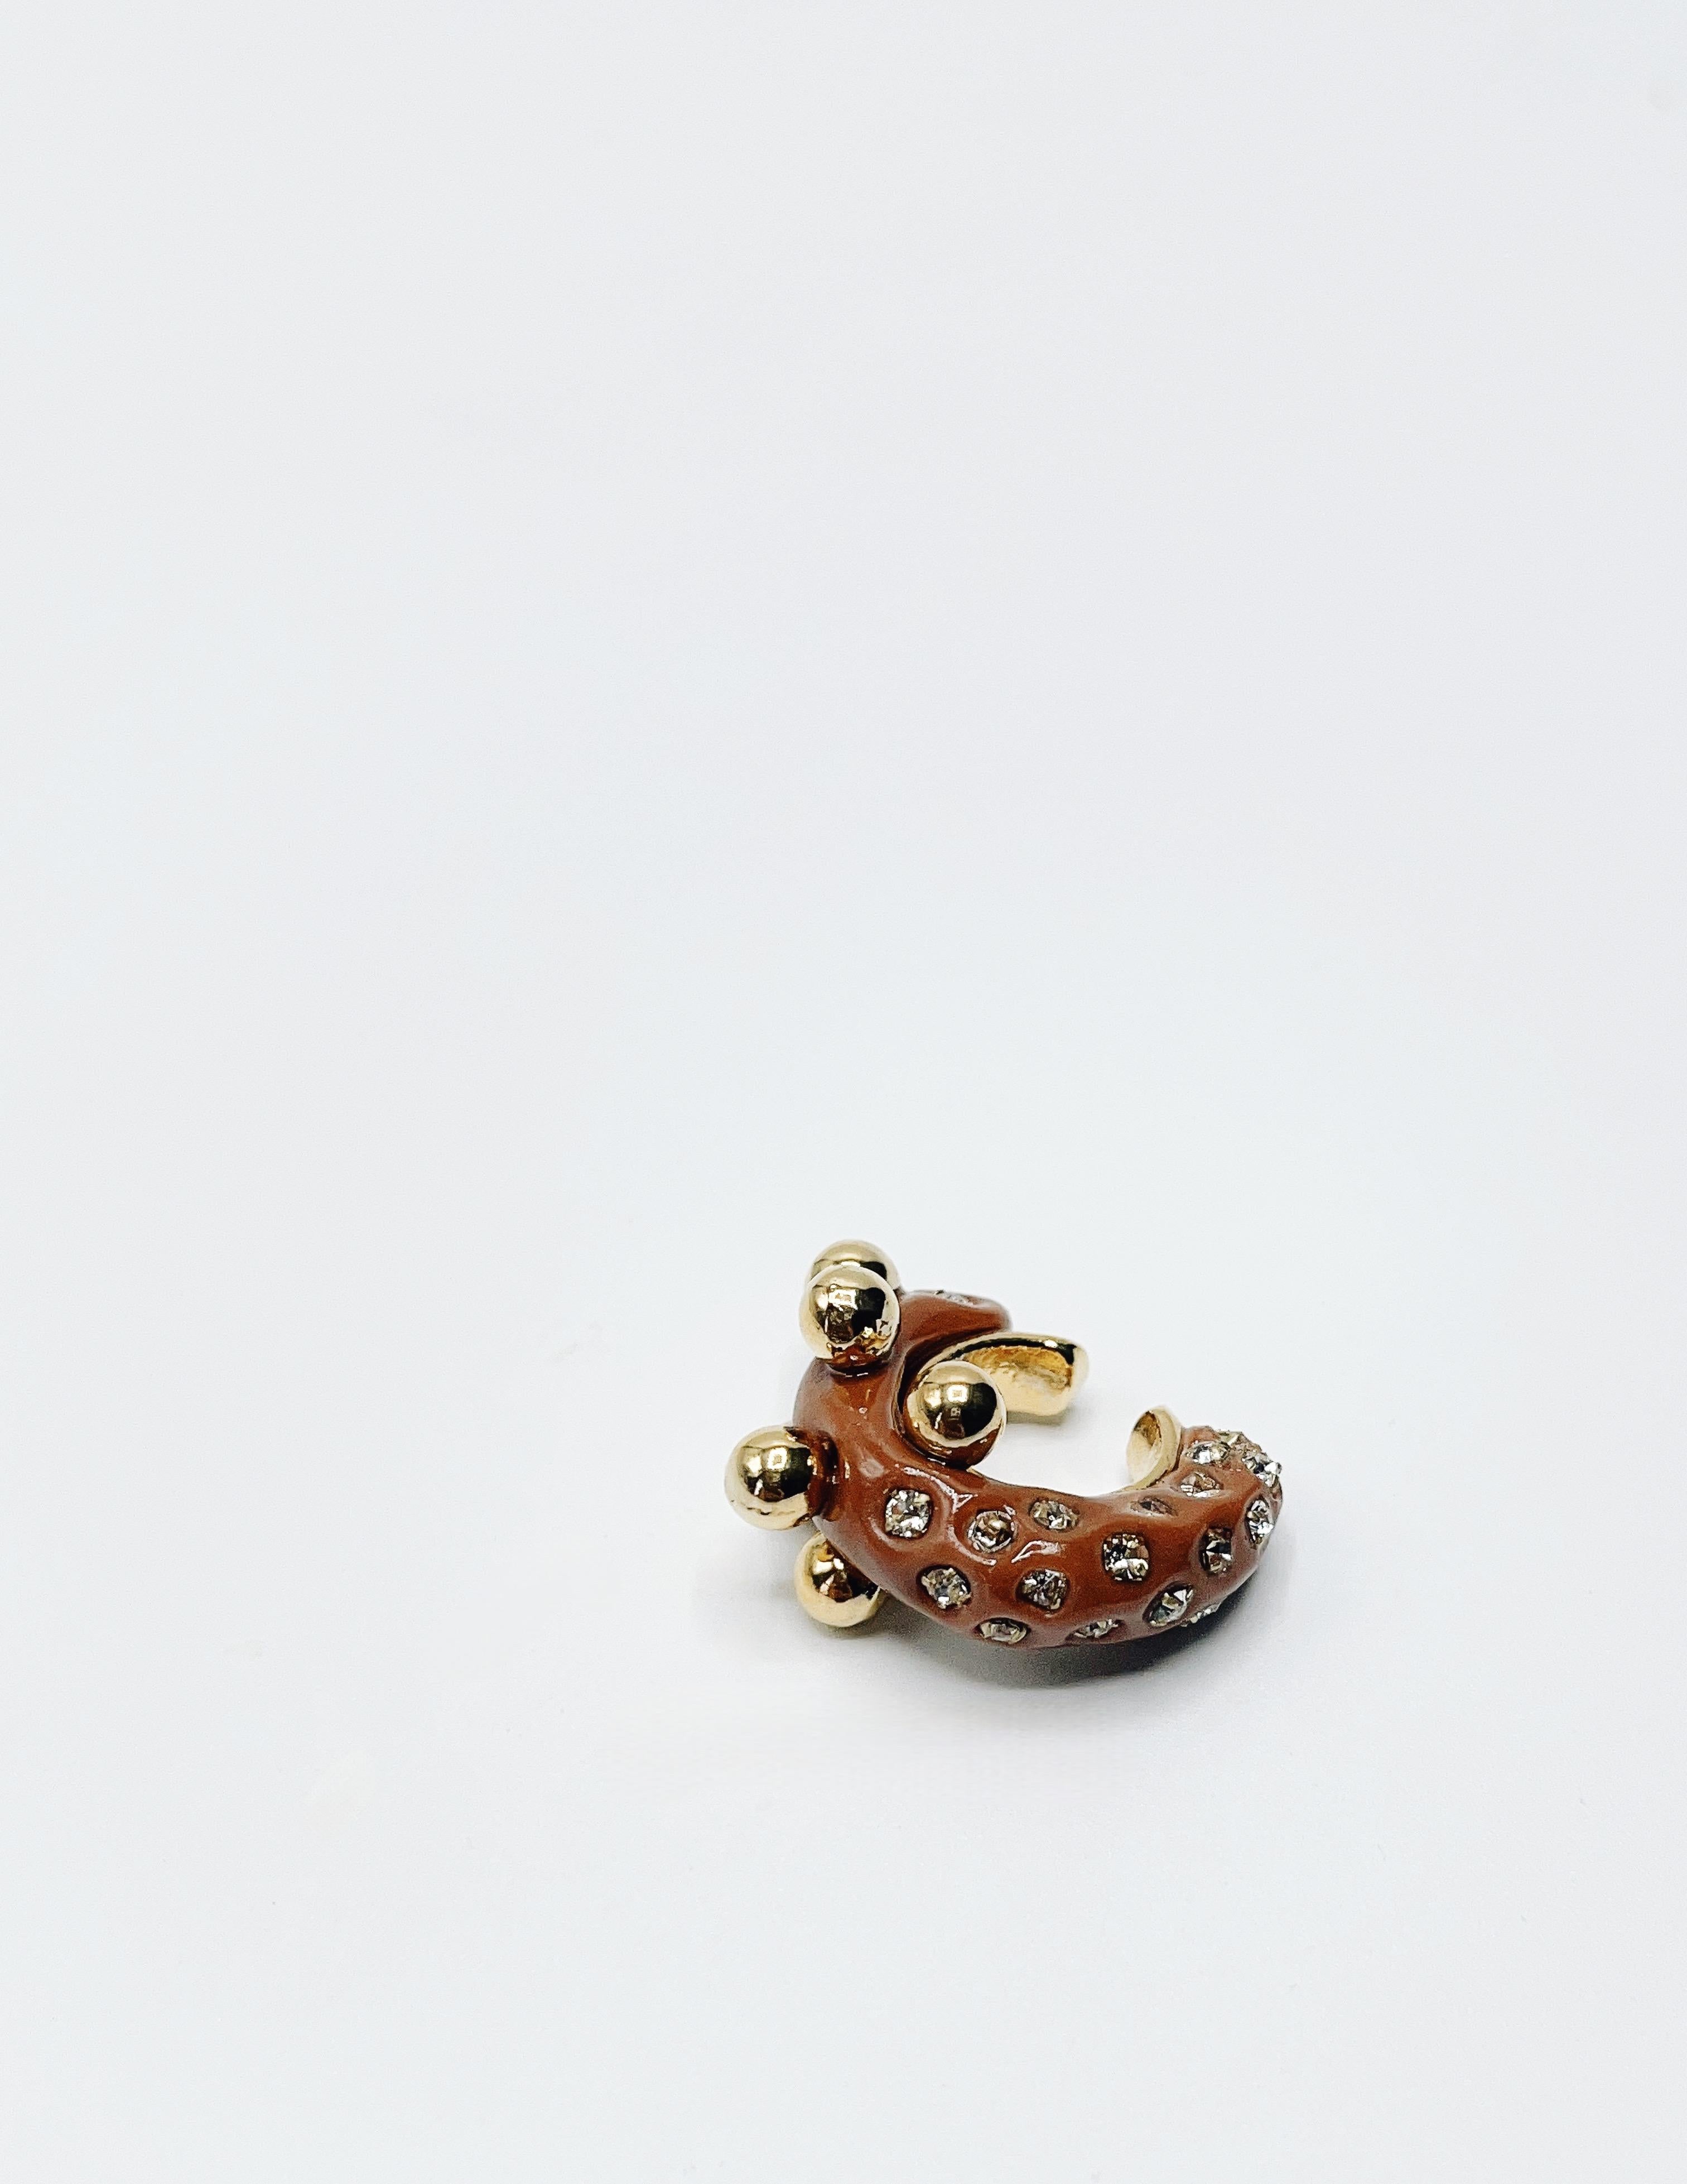 Work Serial No. 1110301235001
This item is Single Ear-cuff.

Hannayoo Works has created the Hand-Crafted Ear-Objects.
 Teardrops ear cuffs were found passing the Pandemic, hoping all tears turn to happiness. The primary material of the Objects is